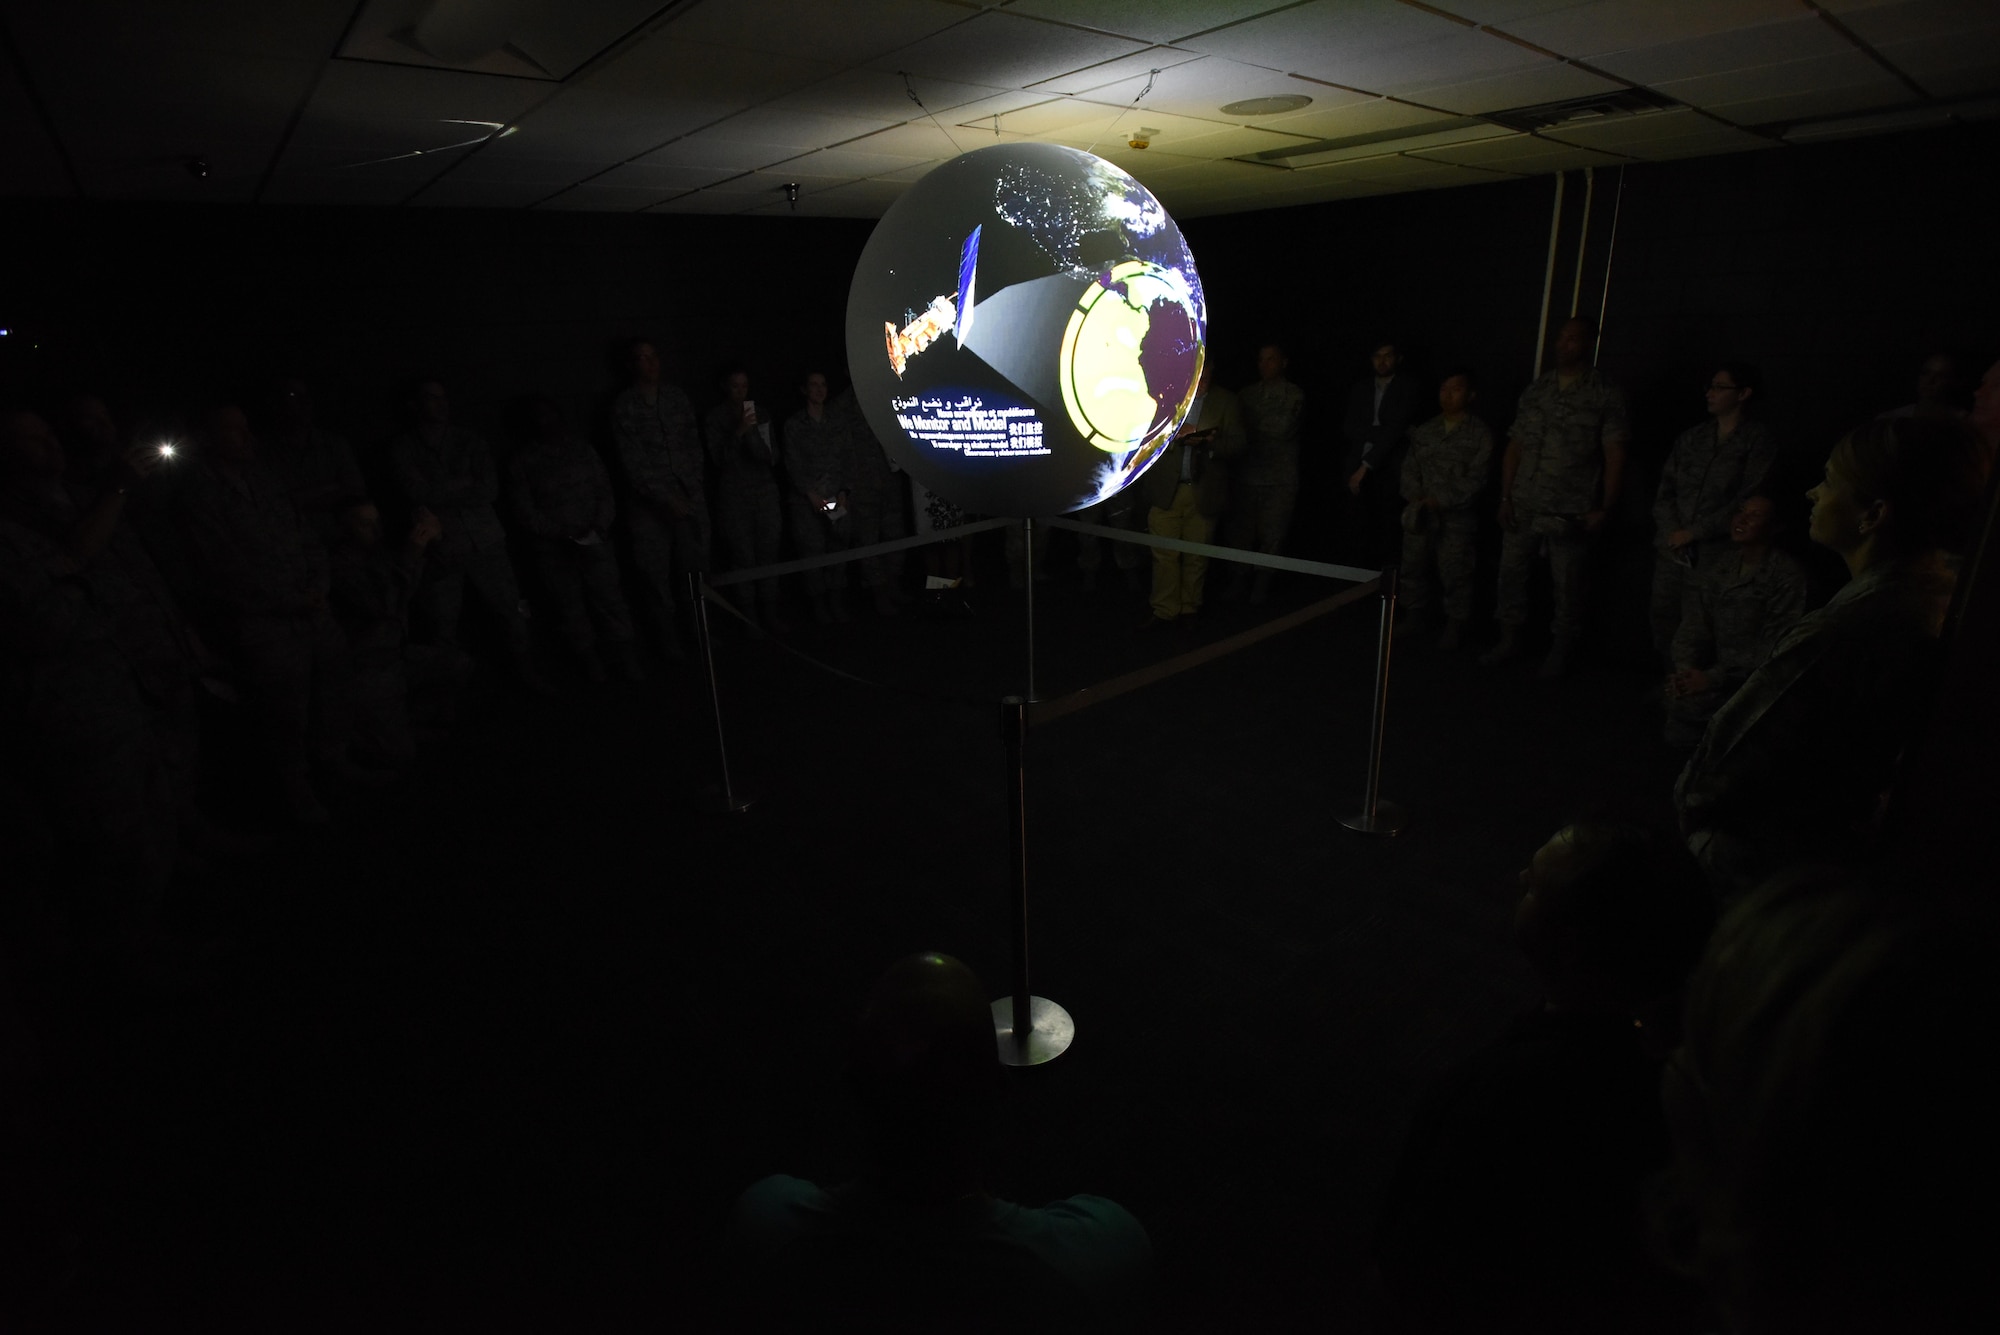 Keesler personnel receive a Science on a Sphere demonstration during a ribbon cutting ceremony at the Weather Training Complex March 23, 2017, on Keesler Air Force Base, Miss. This latest training aid displays planetary data onto a suspended carbon-fiber sphere helping instructors enhance student’s understanding of the atmosphere. (U.S. Air Force photo by Kemberly Groue)